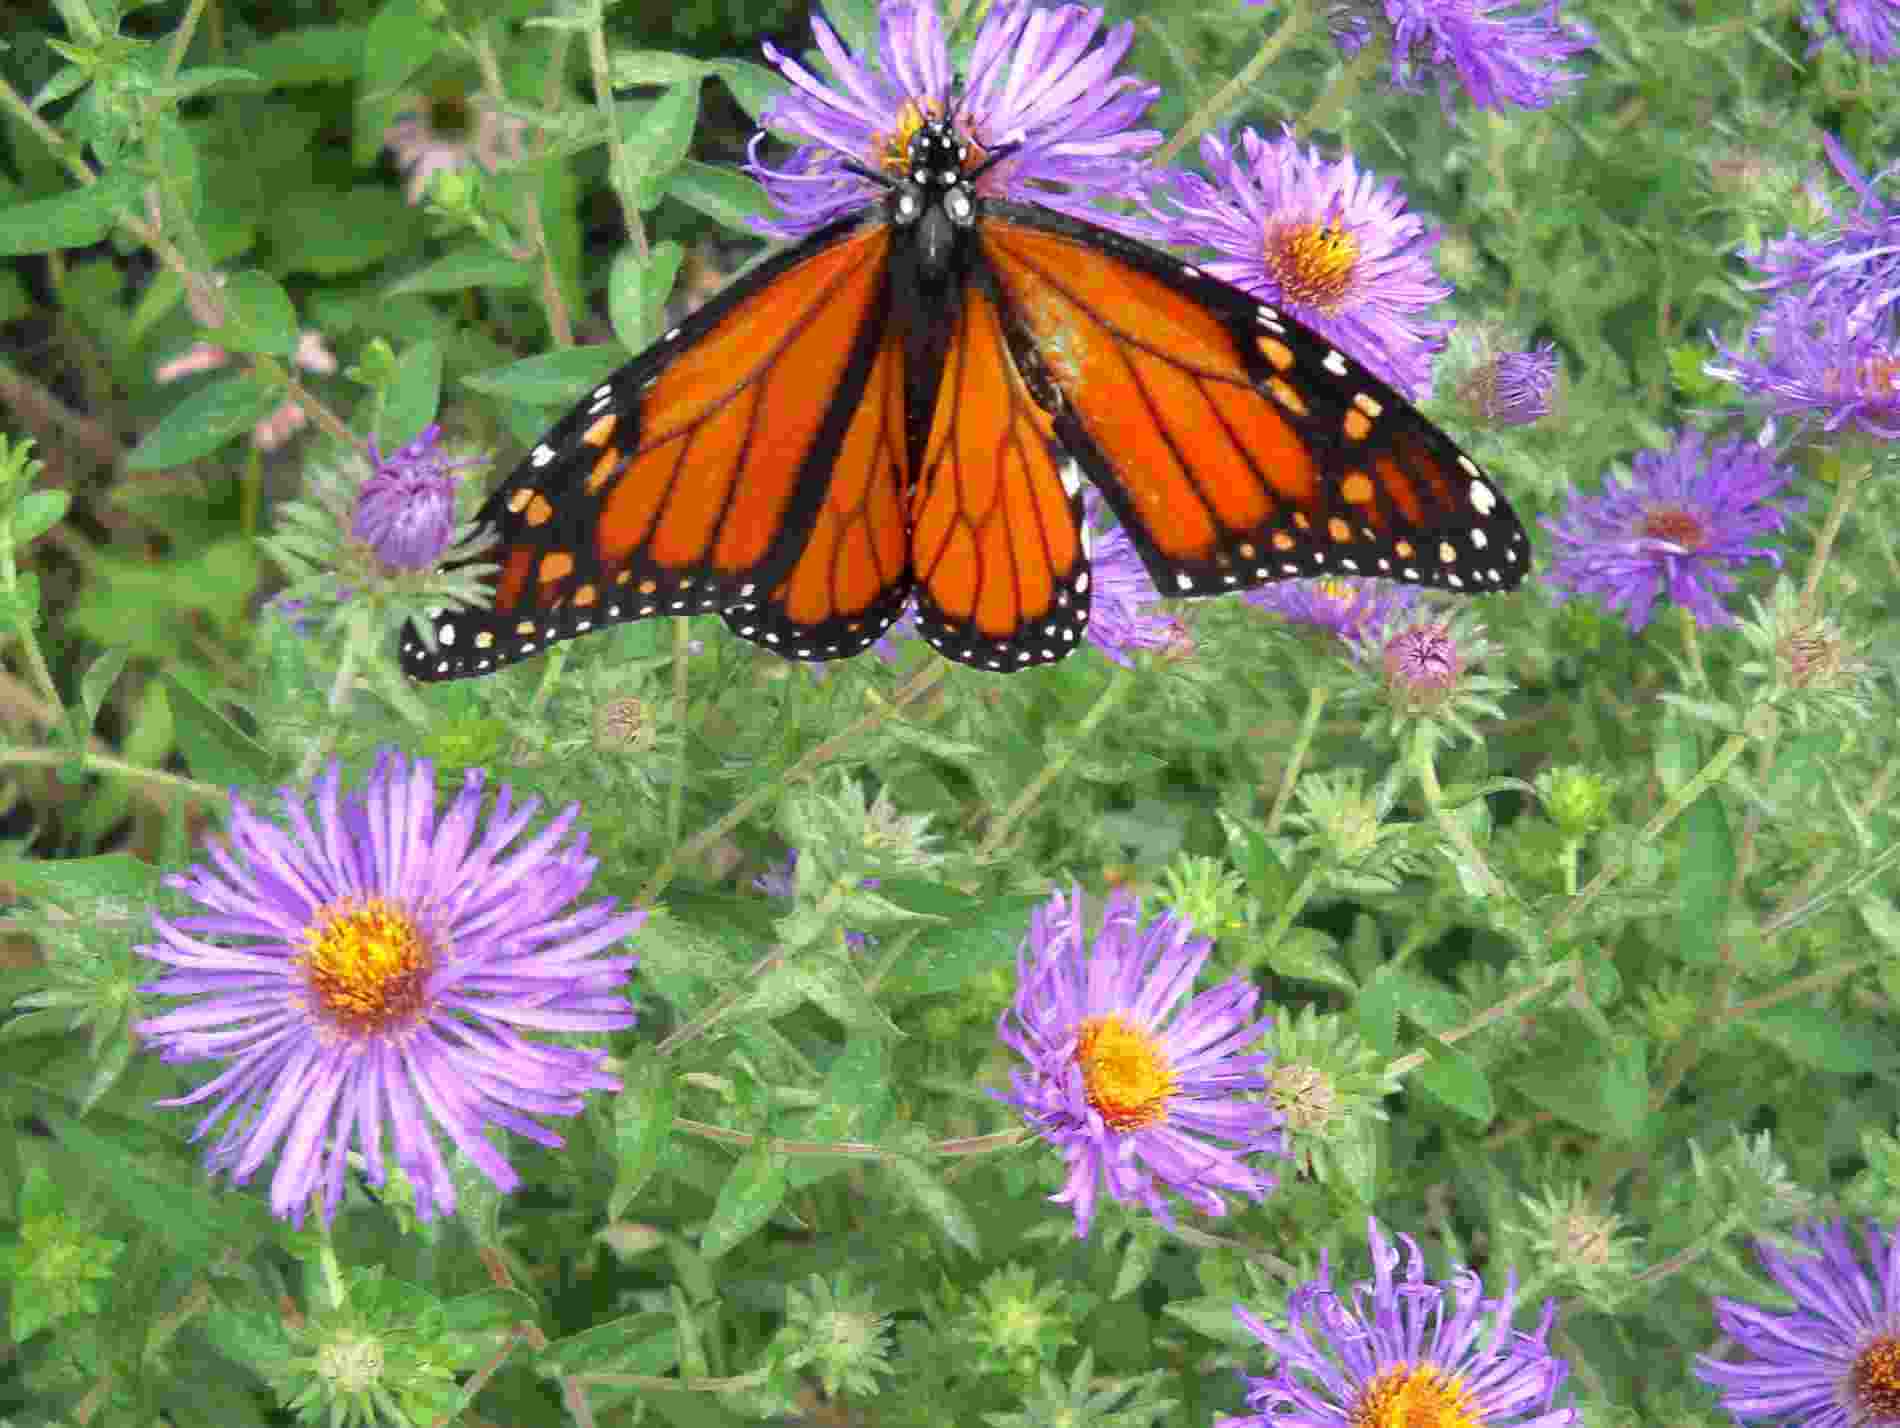 Monarch butterfly refueling with nectar from New England asters on the east side of Milwaukee, Wisconsin, on September 5, 2010, early afternoon, by Shamanic Shift (a.k.a. ECP) on Flickr.com